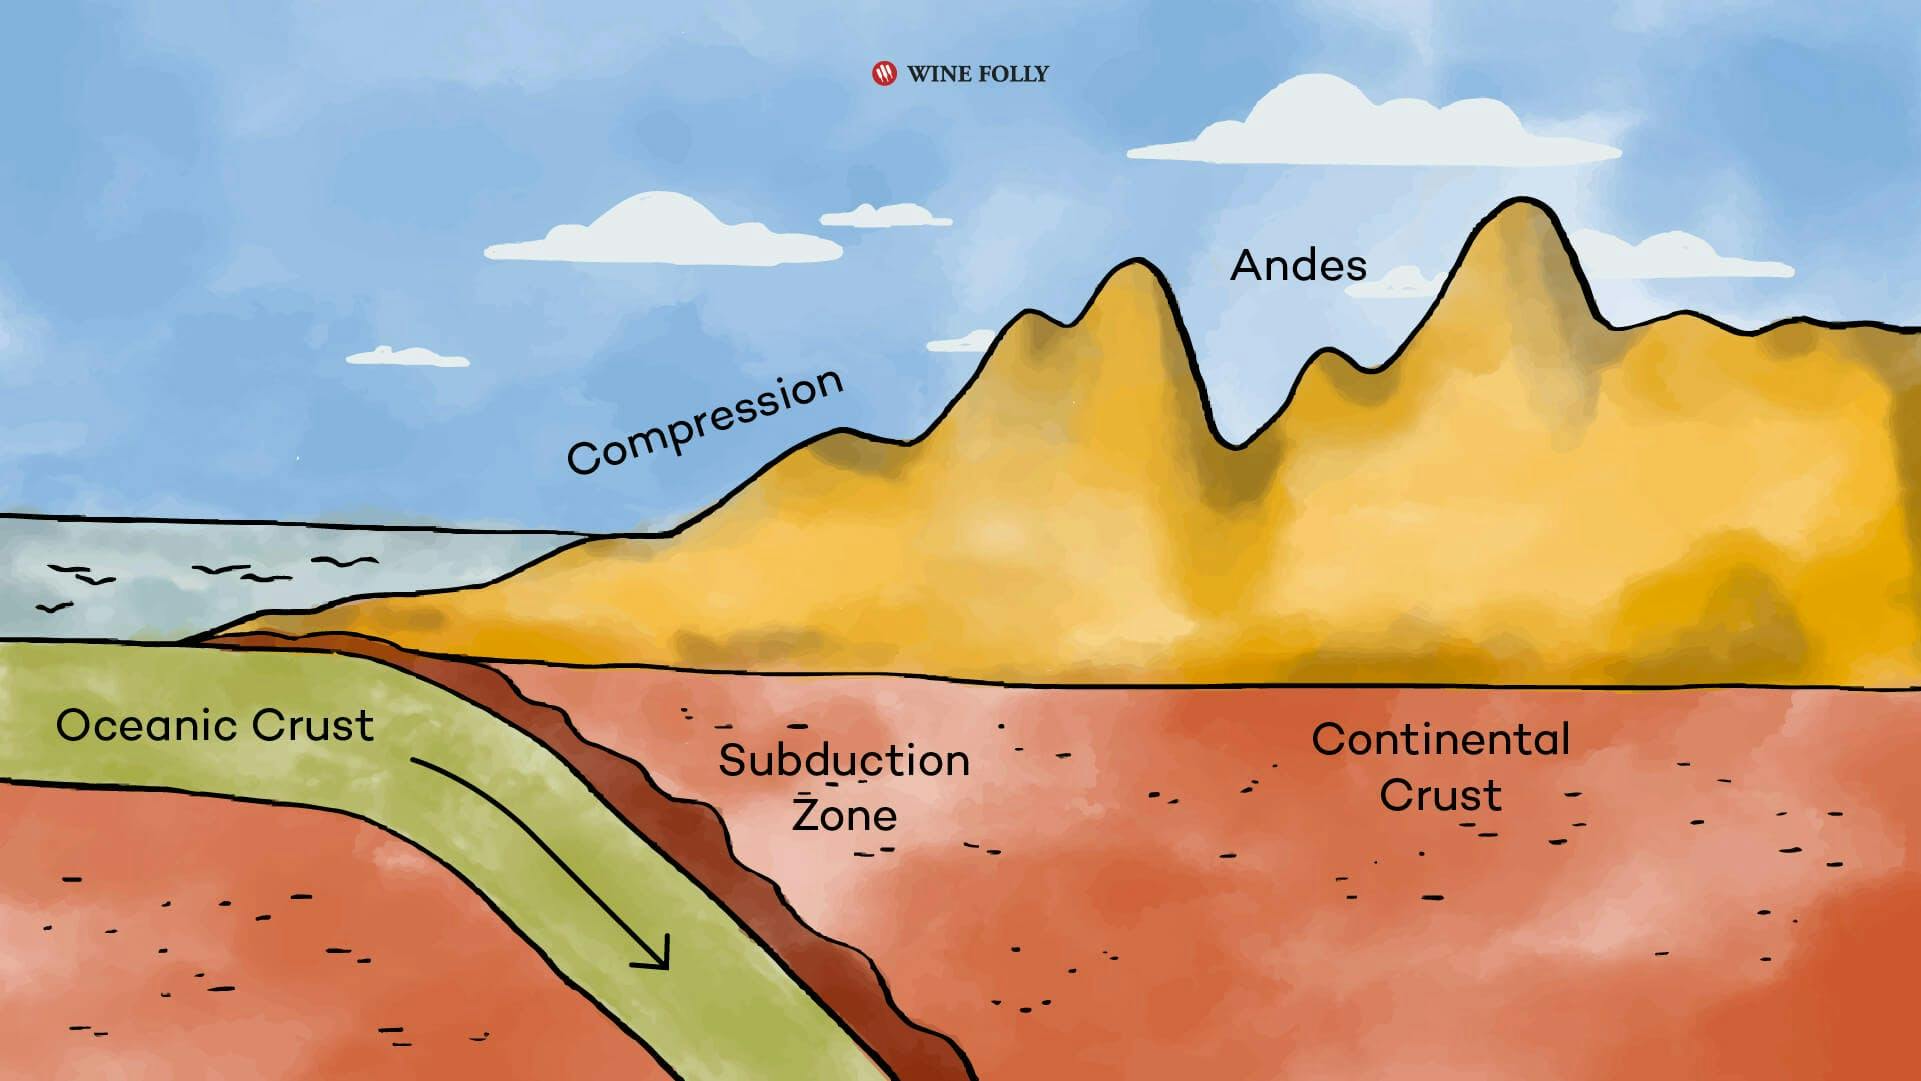 Andes Mountains created high plains for vineyards